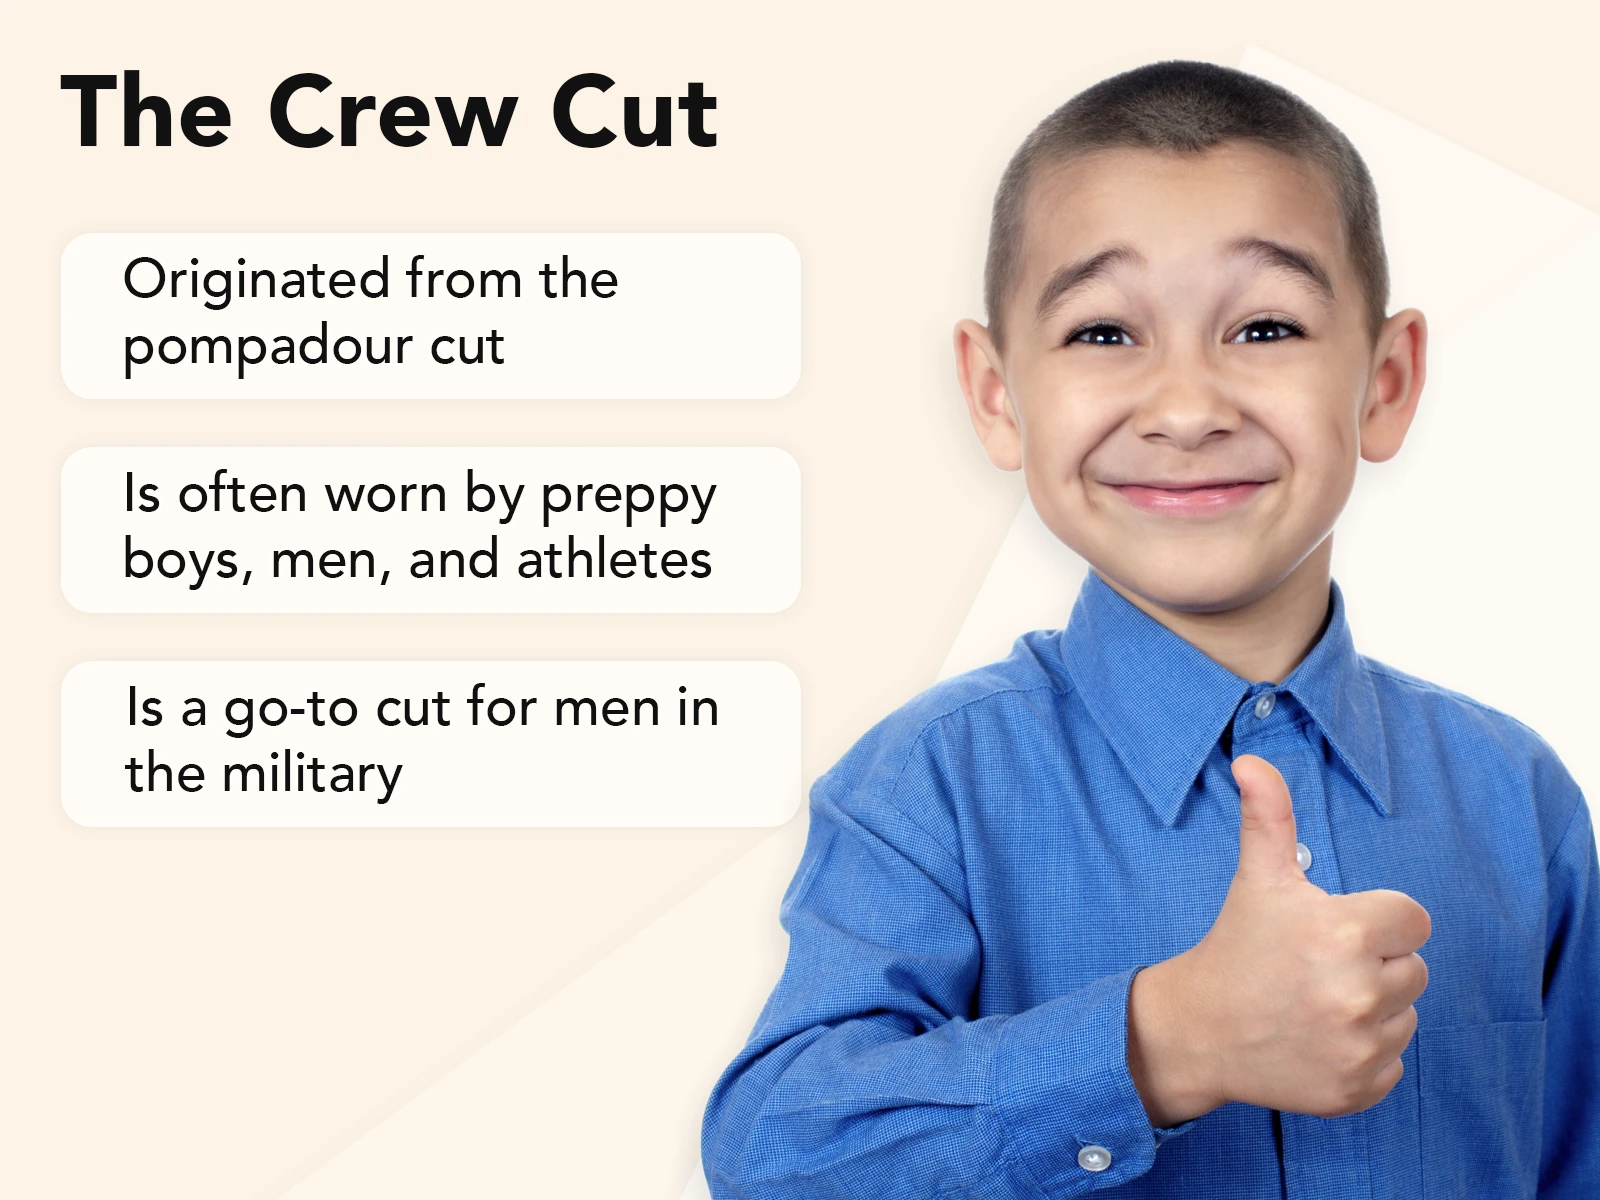 What Is the Crew Cut in a tan explainer image